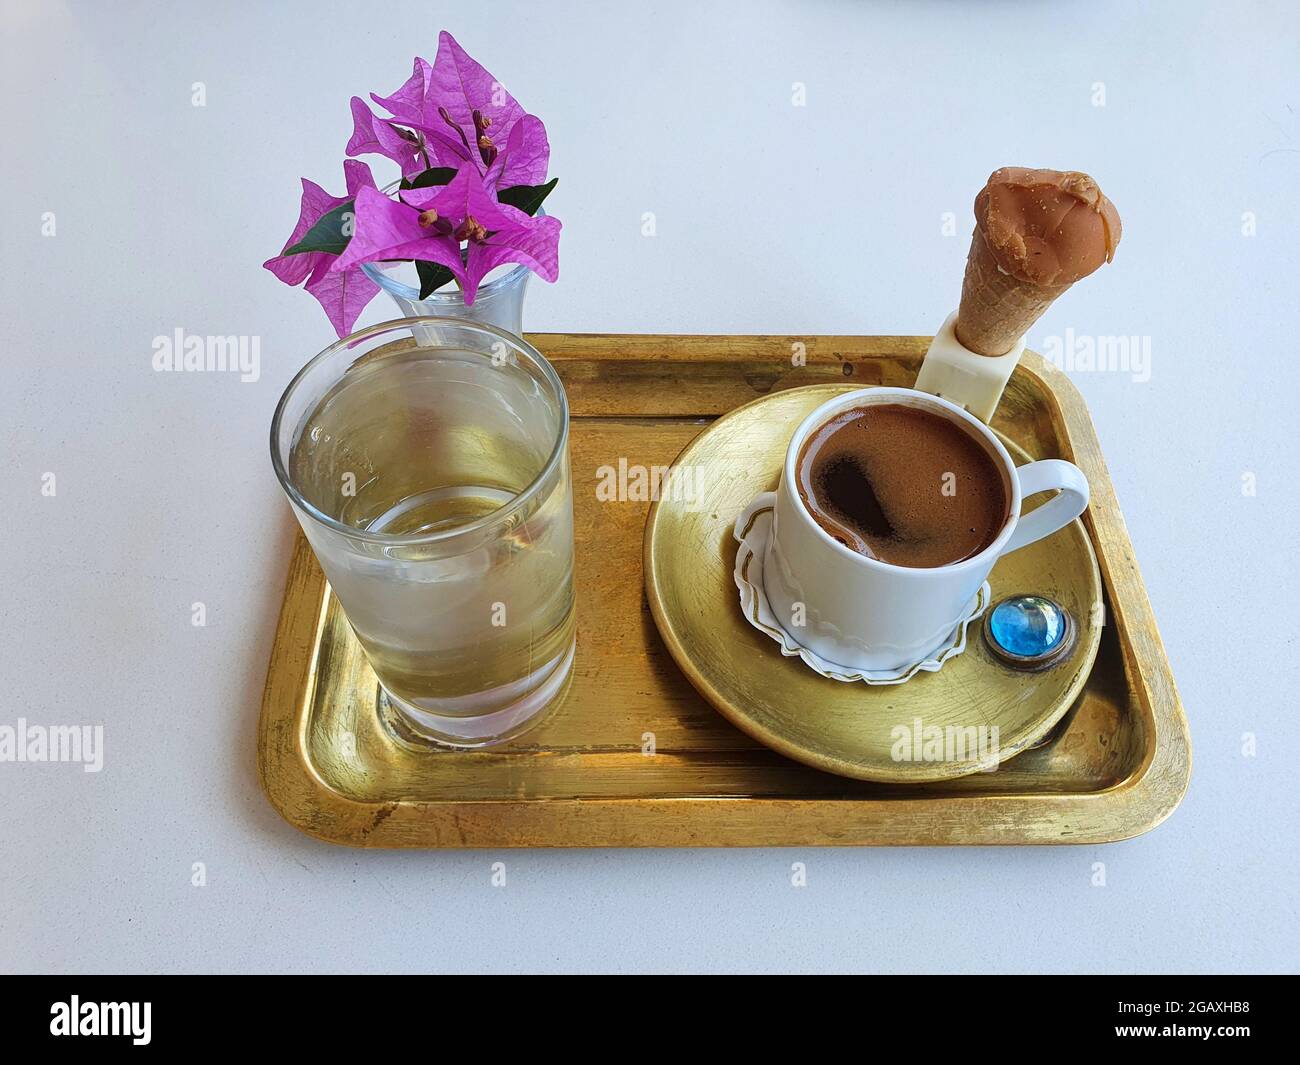 Delicious, strong and aromatic Turkish coffee. Serving with delicious ice cream and a beautiful pink flower. Stock Photo